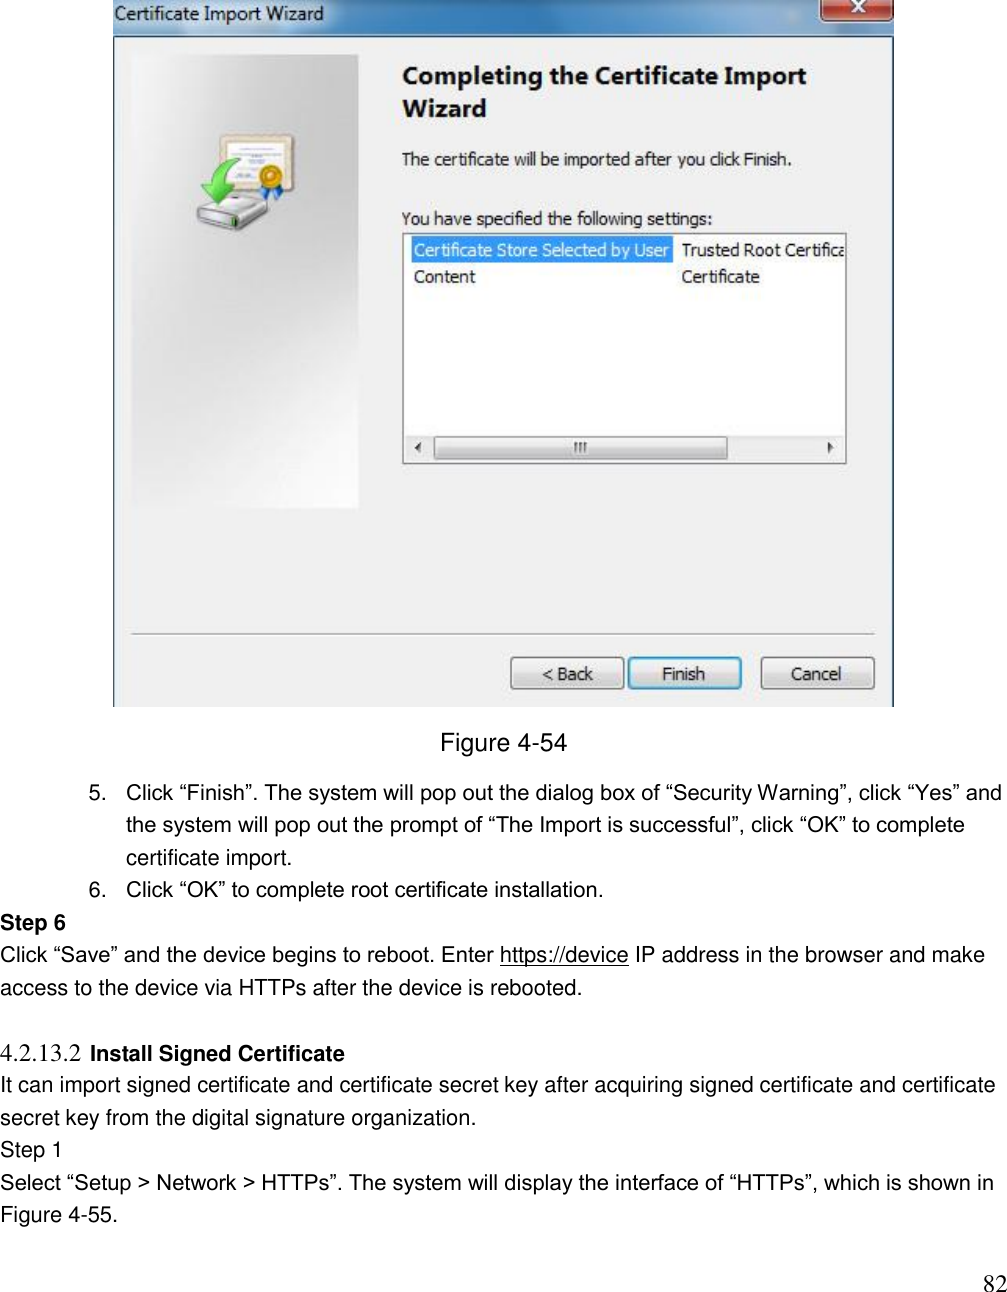                                                                              82  Figure 4-54 5. Click “Finish”. The system will pop out the dialog box of “Security Warning”, click “Yes” and the system will pop out the prompt of “The Import is successful”, click “OK” to complete certificate import.  6. Click “OK” to complete root certificate installation.  Step 6  Click “Save” and the device begins to reboot. Enter https://device IP address in the browser and make access to the device via HTTPs after the device is rebooted.   4.2.13.2 Install Signed Certificate  It can import signed certificate and certificate secret key after acquiring signed certificate and certificate secret key from the digital signature organization.  Step 1  Select “Setup &gt; Network &gt; HTTPs”. The system will display the interface of “HTTPs”, which is shown in Figure 4-55.  